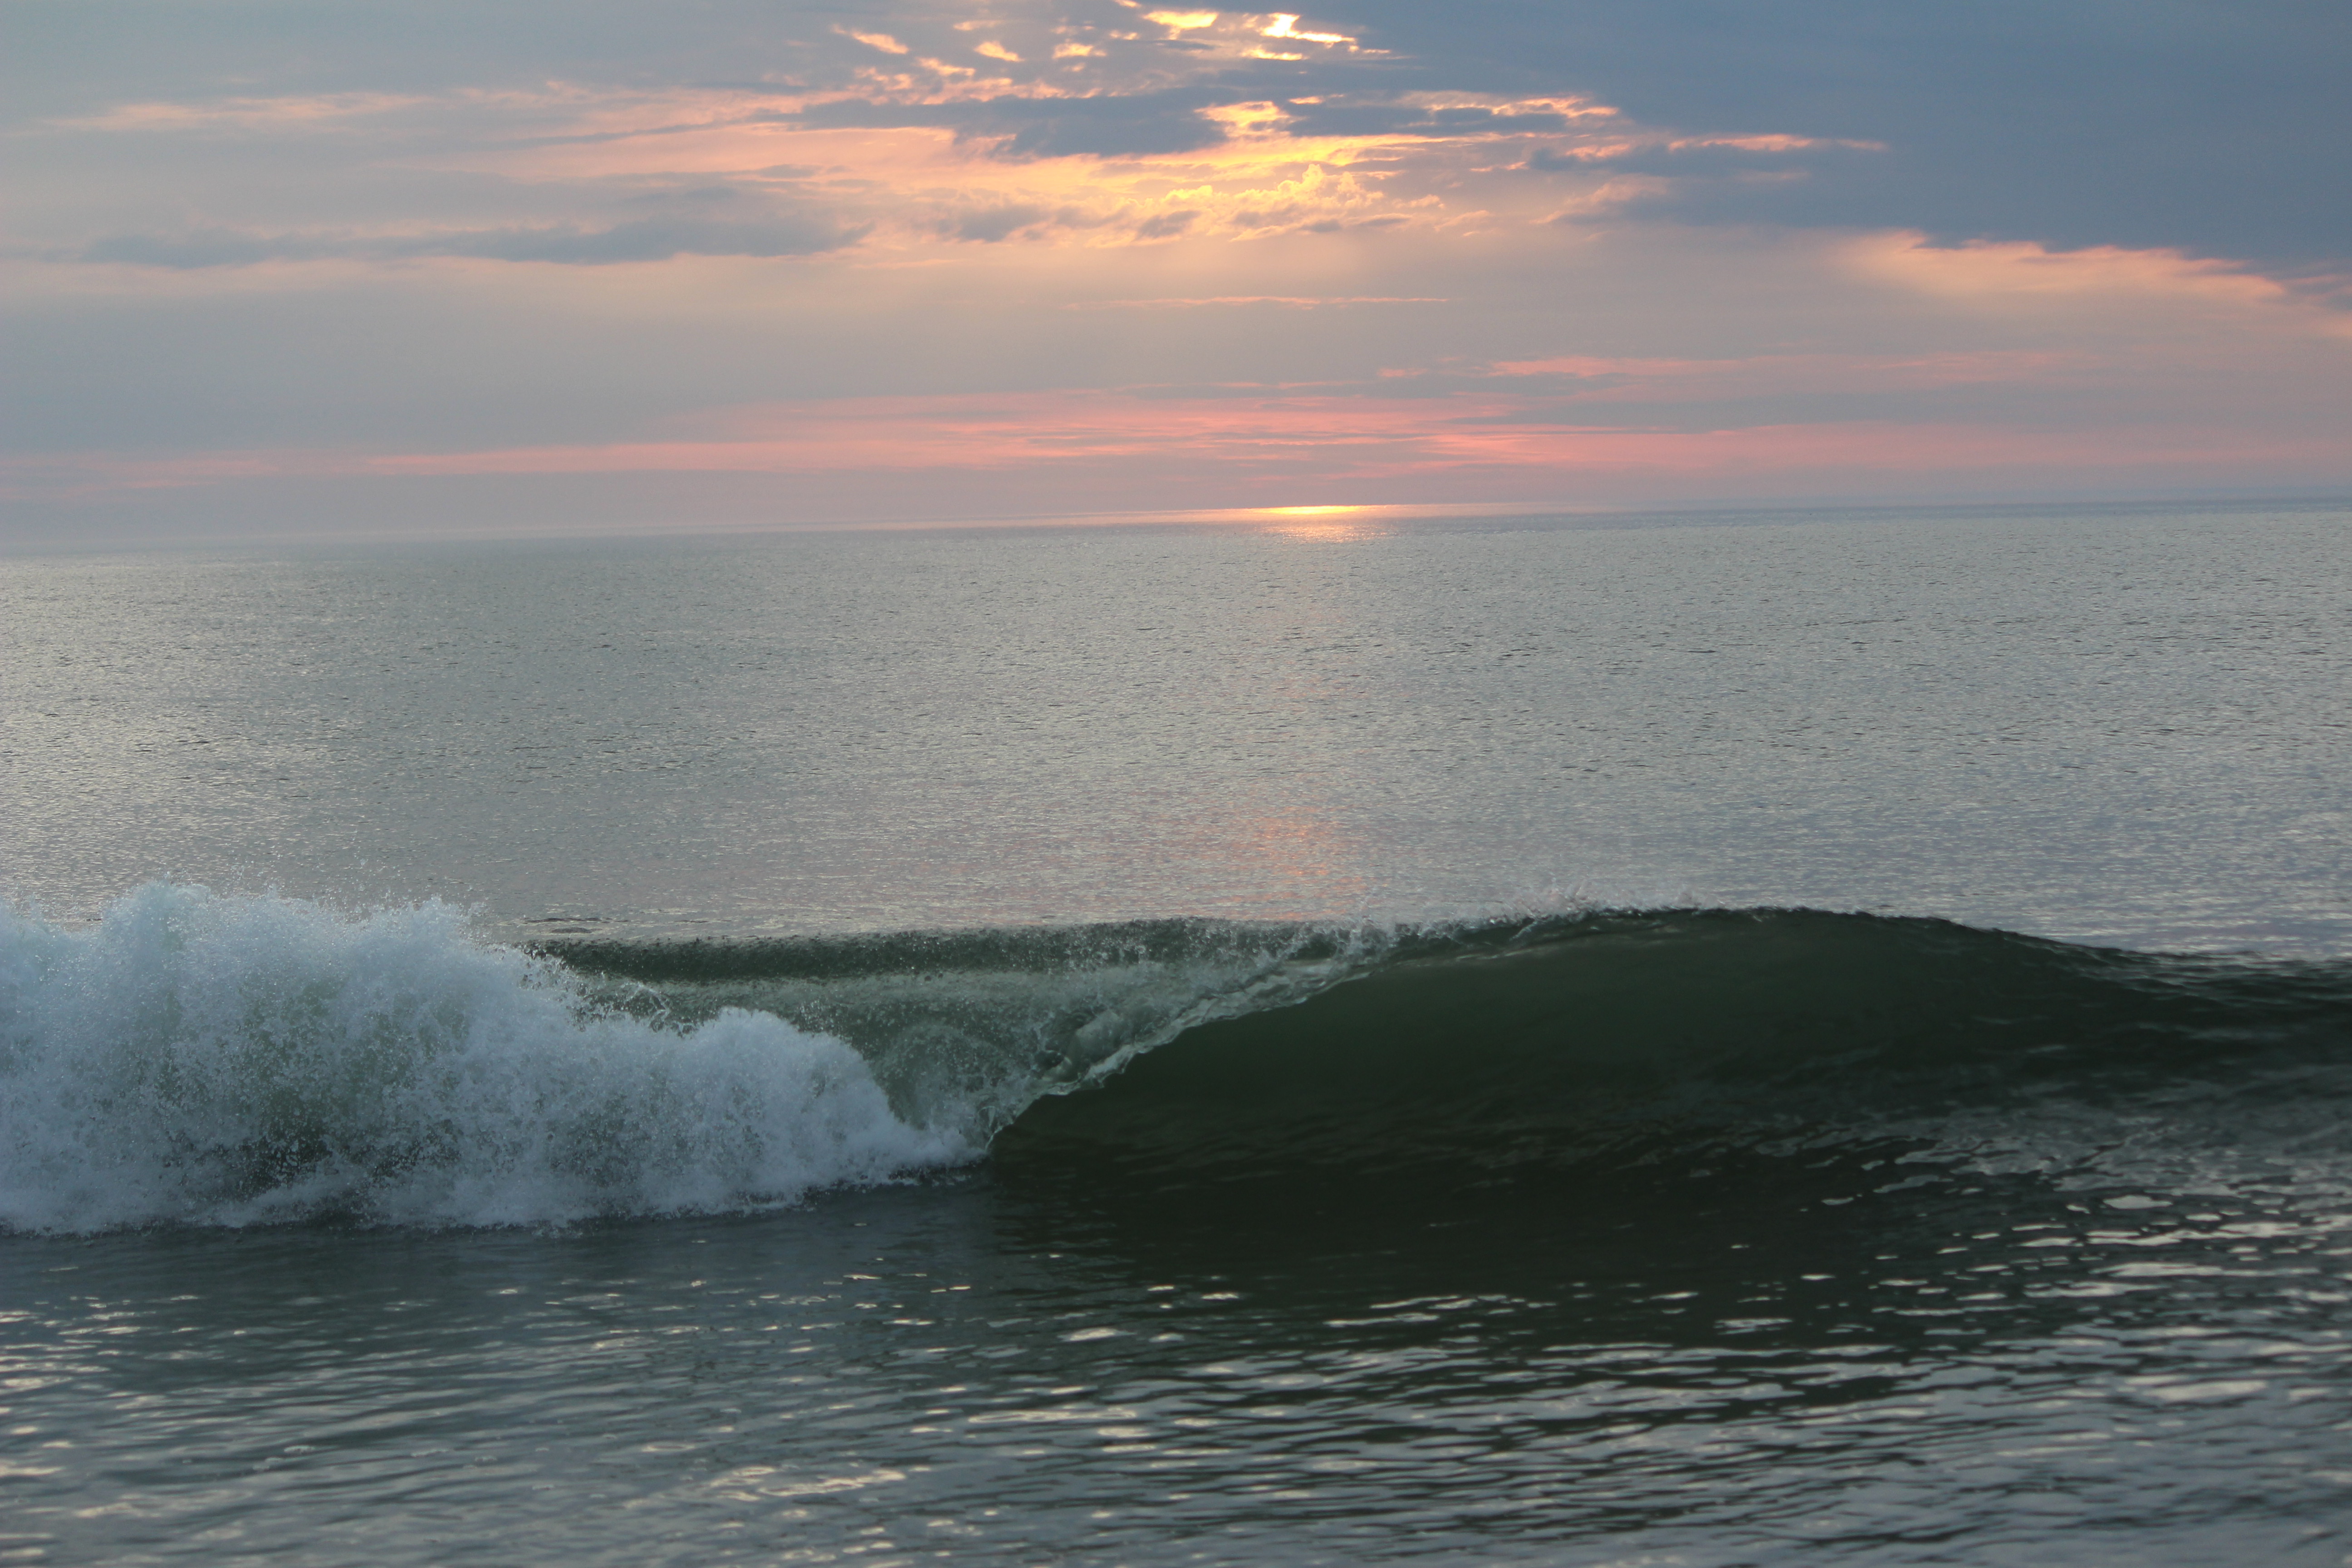 A curling wave breaks against the backdrop of a pink sunrise.